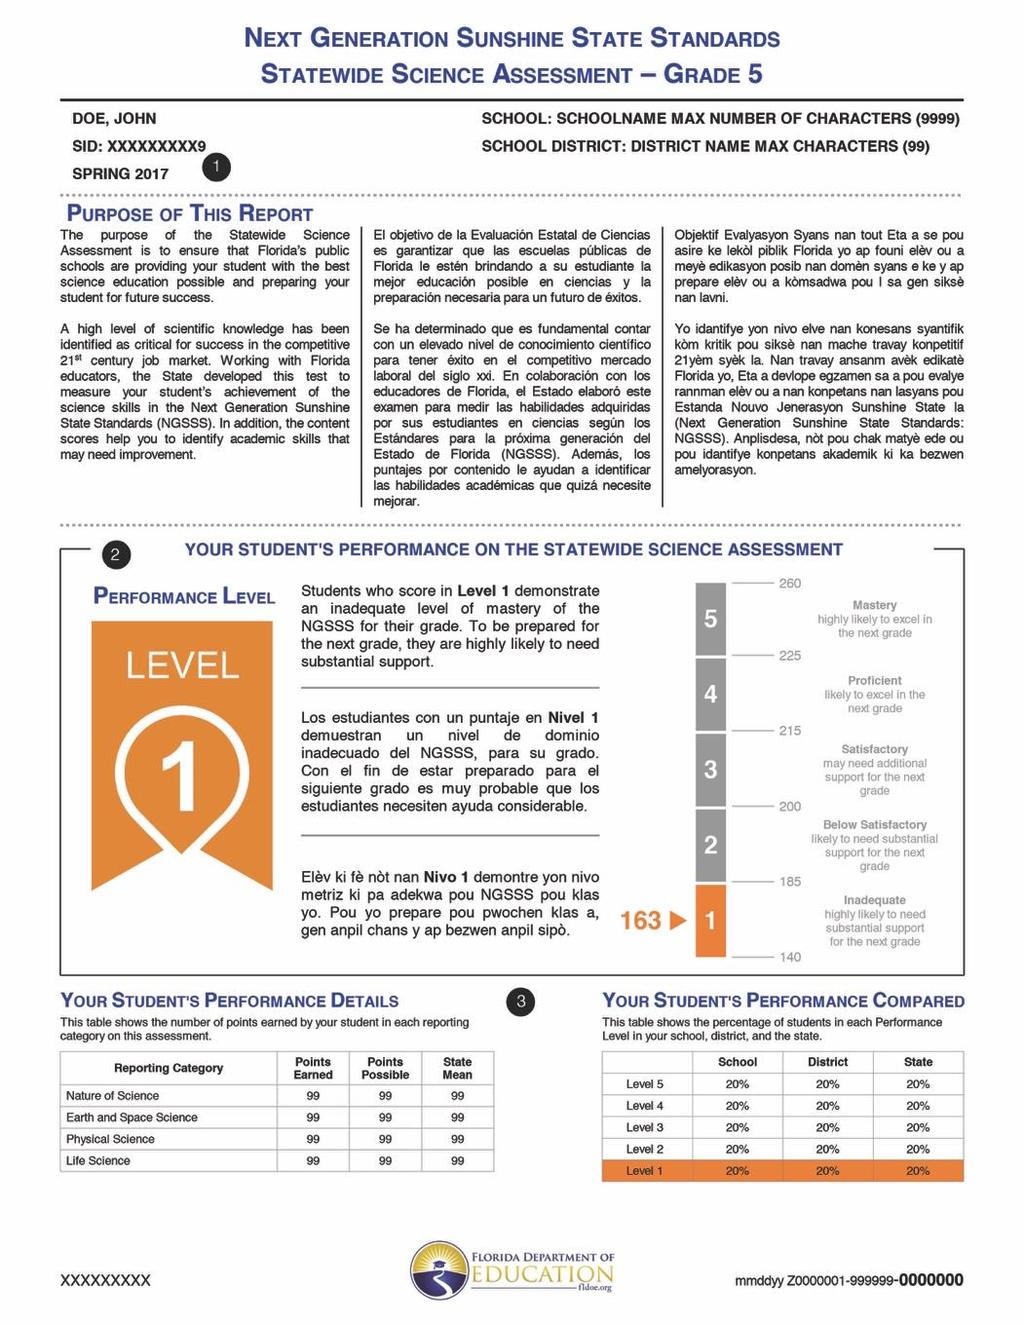 Statewide Science Assessment Individual Student Report The format shown above is used for the Statewide Science Assessment Individual Student Report, which is a one-page report.